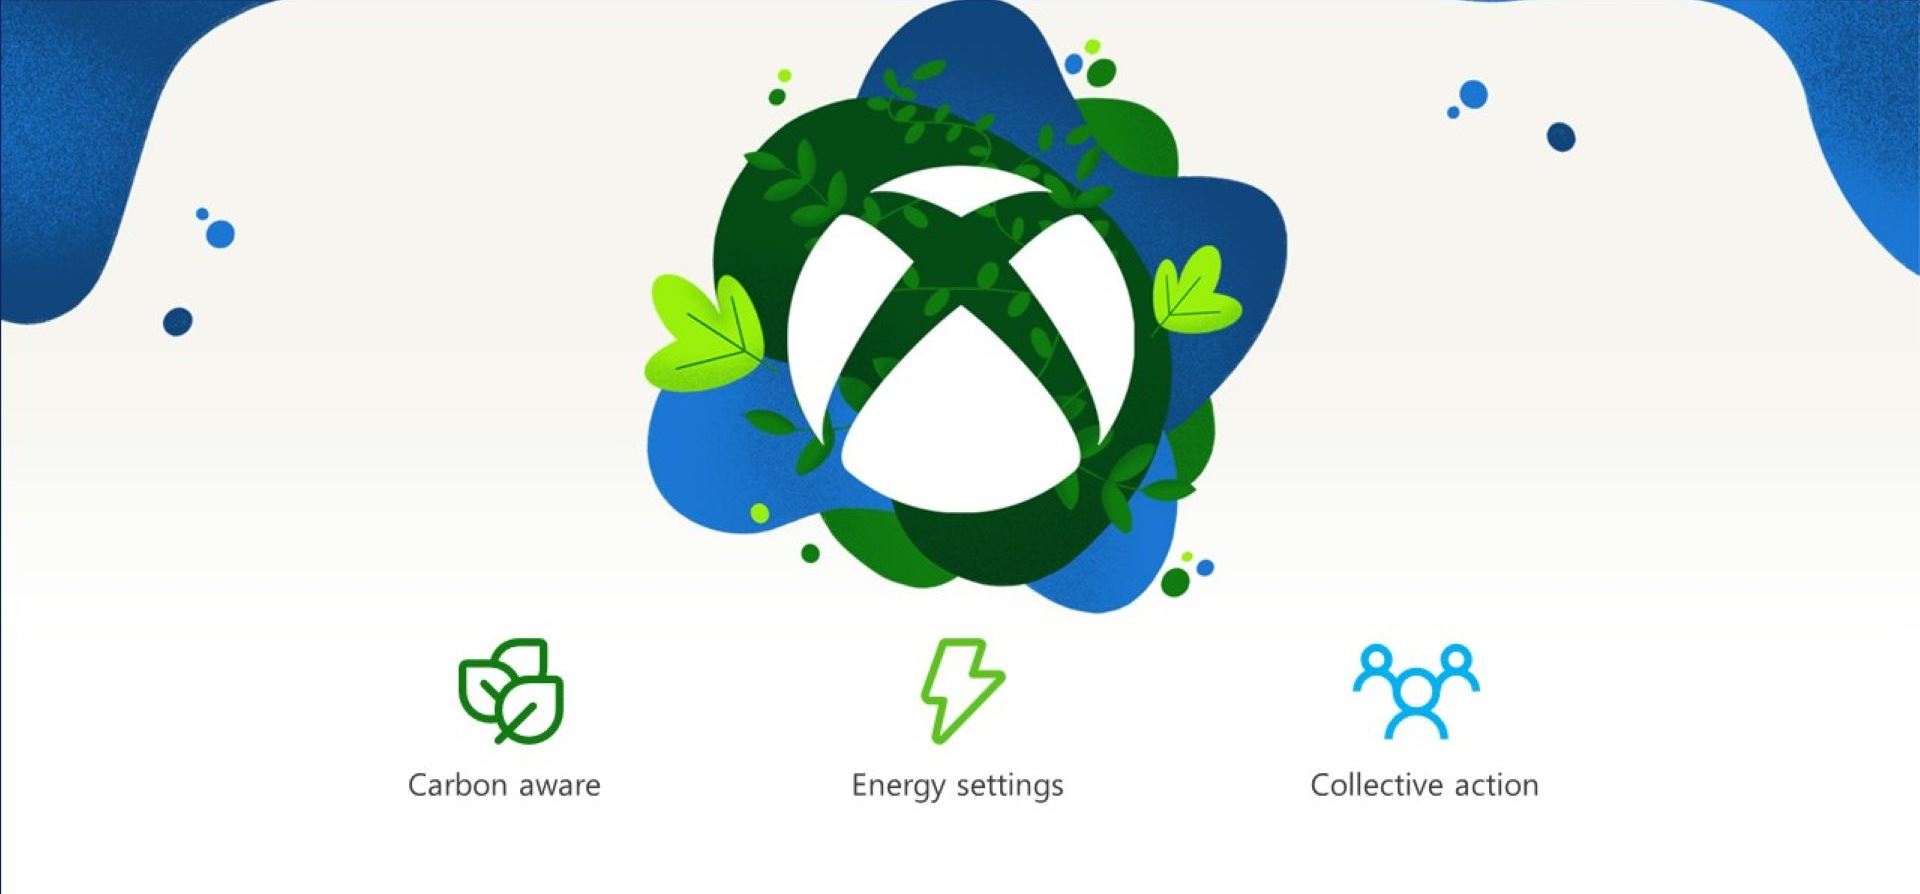 Official Xbox art promoting energy saving, carbon awareness, and collective action.